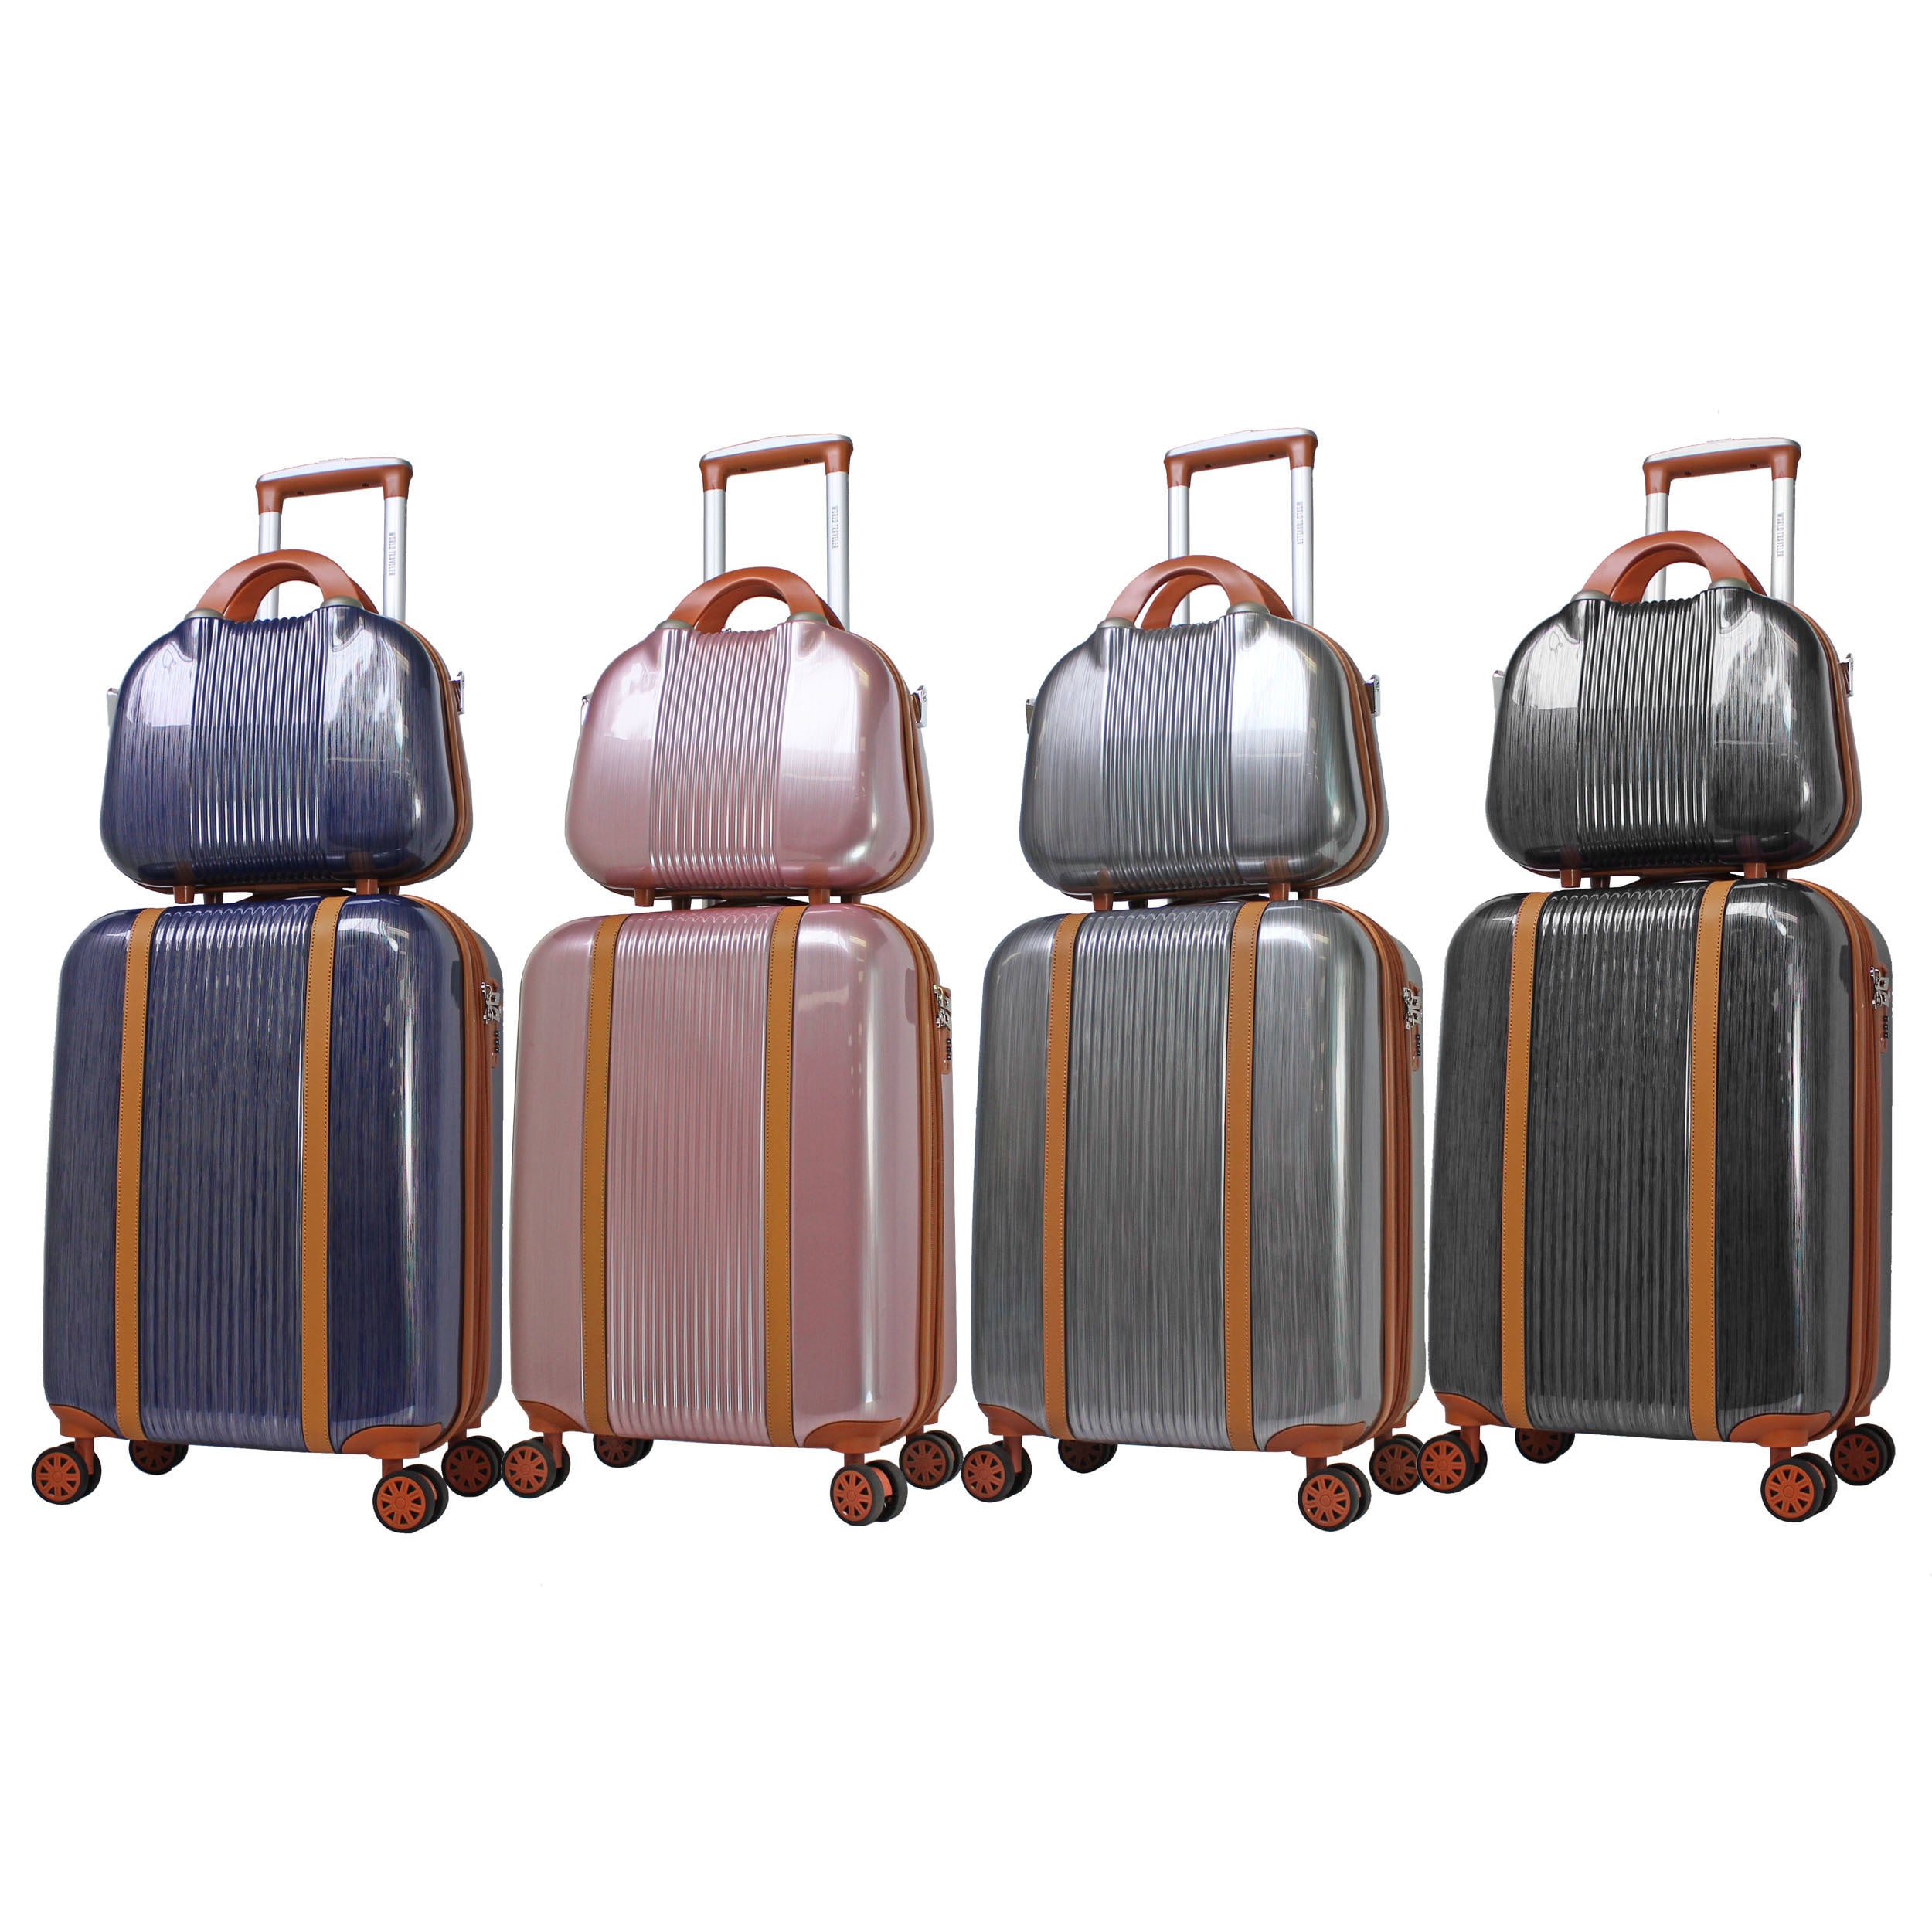 2-Piece Classique Hardside Carry On Spinner Luggage Set | eBay